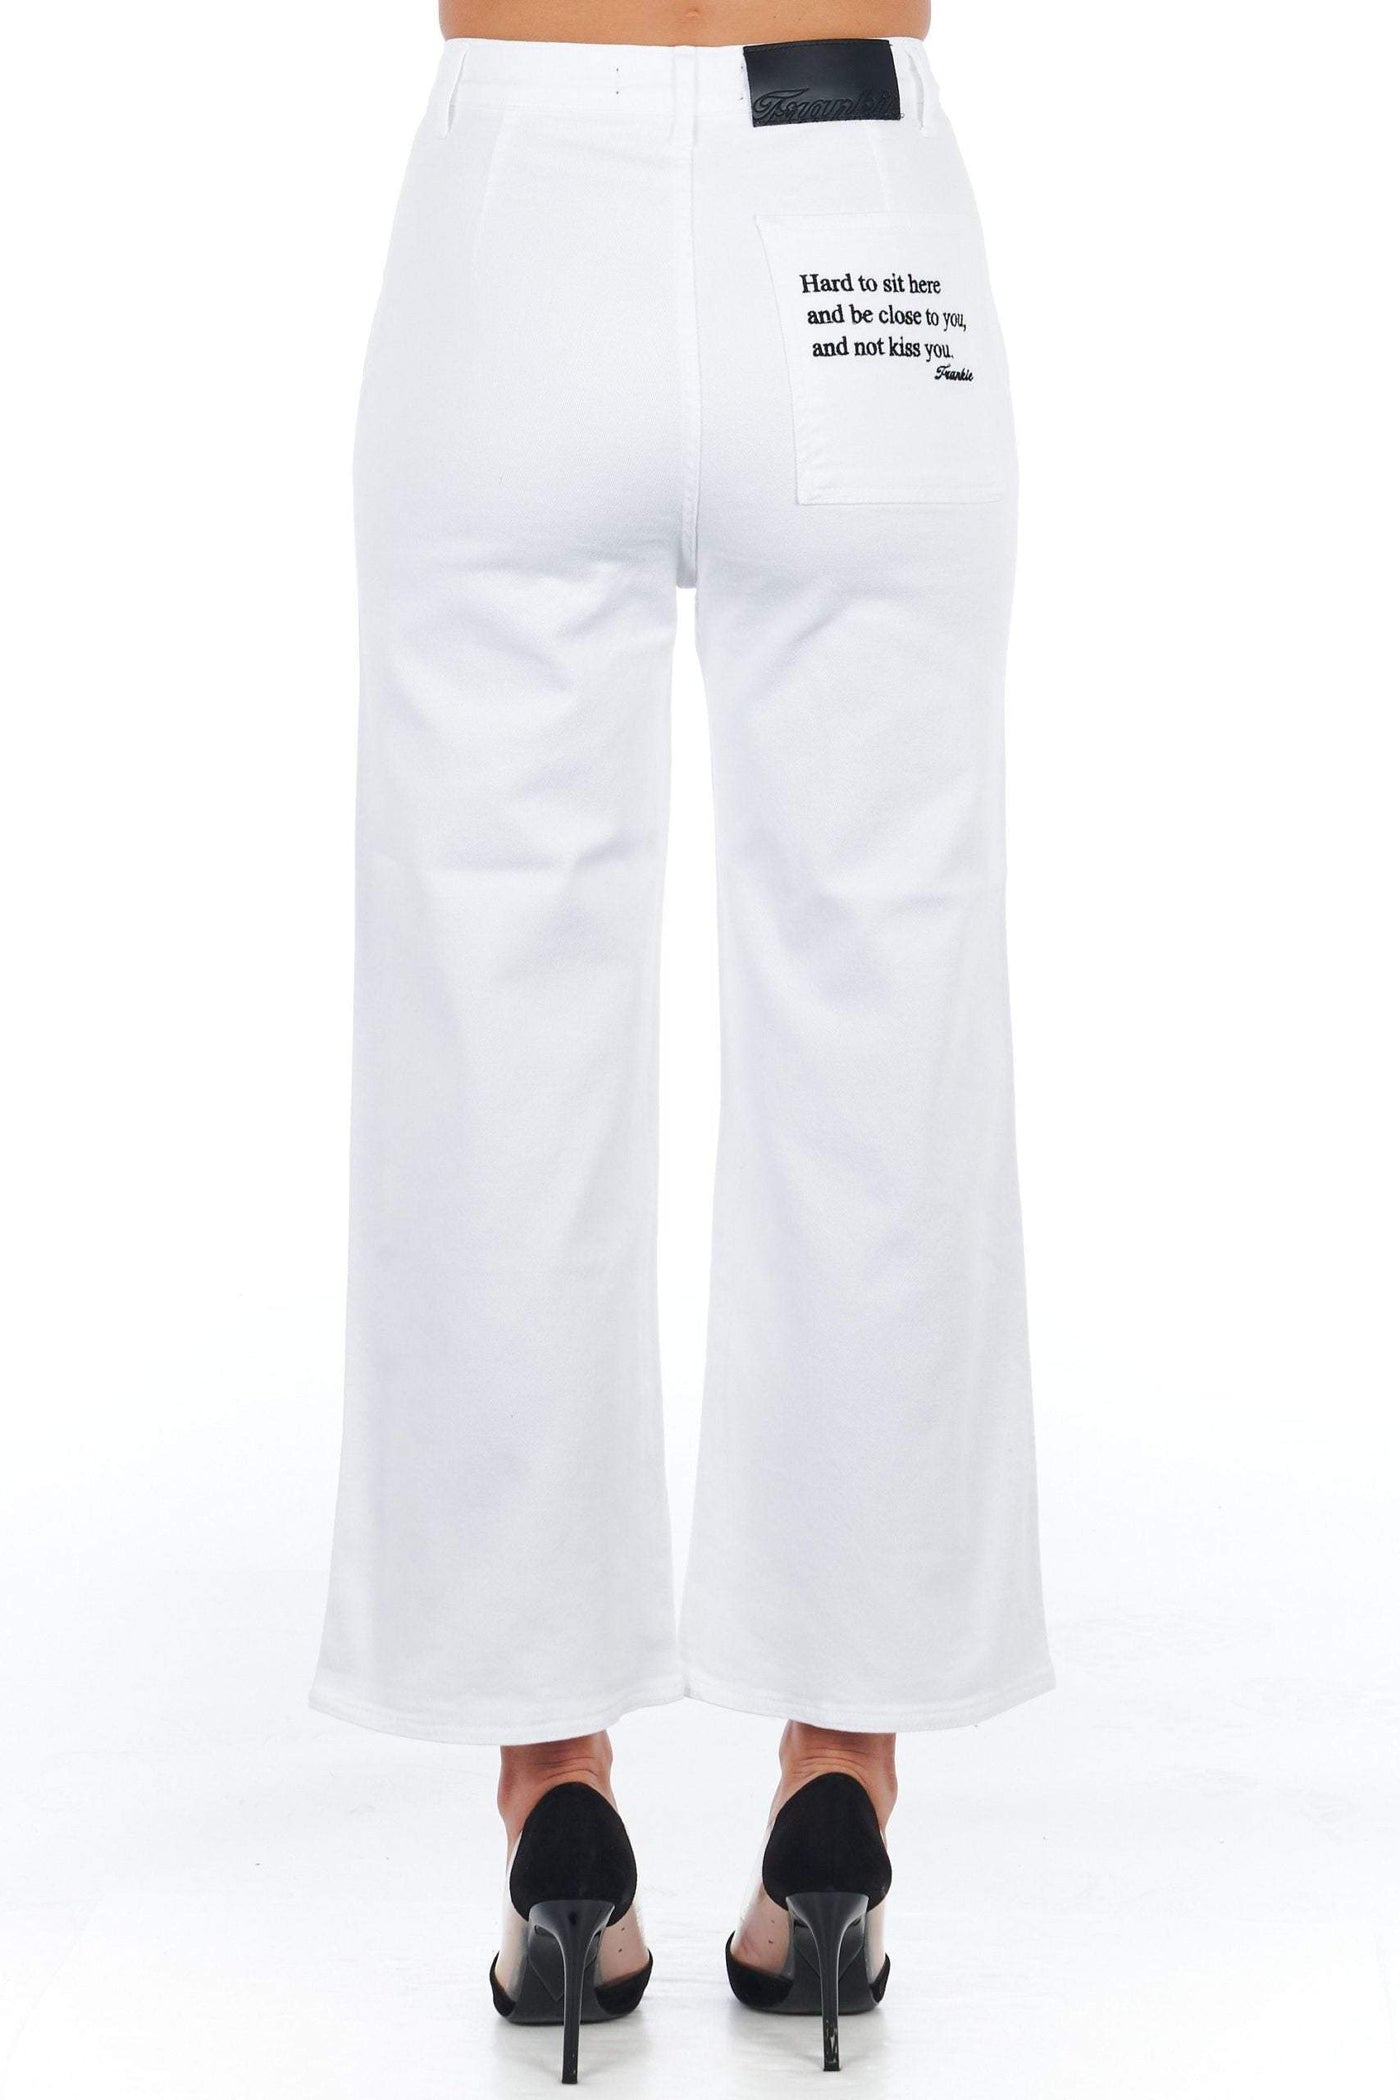 Frankie Morello high waisted multipockets Jeans & Pant #women, feed-agegroup-adult, feed-color-White, feed-gender-female, Frankie Morello, IT40 | XS, IT42 | S, IT44 | M, Jeans & Pants - Women - Clothing, White at SEYMAYKA